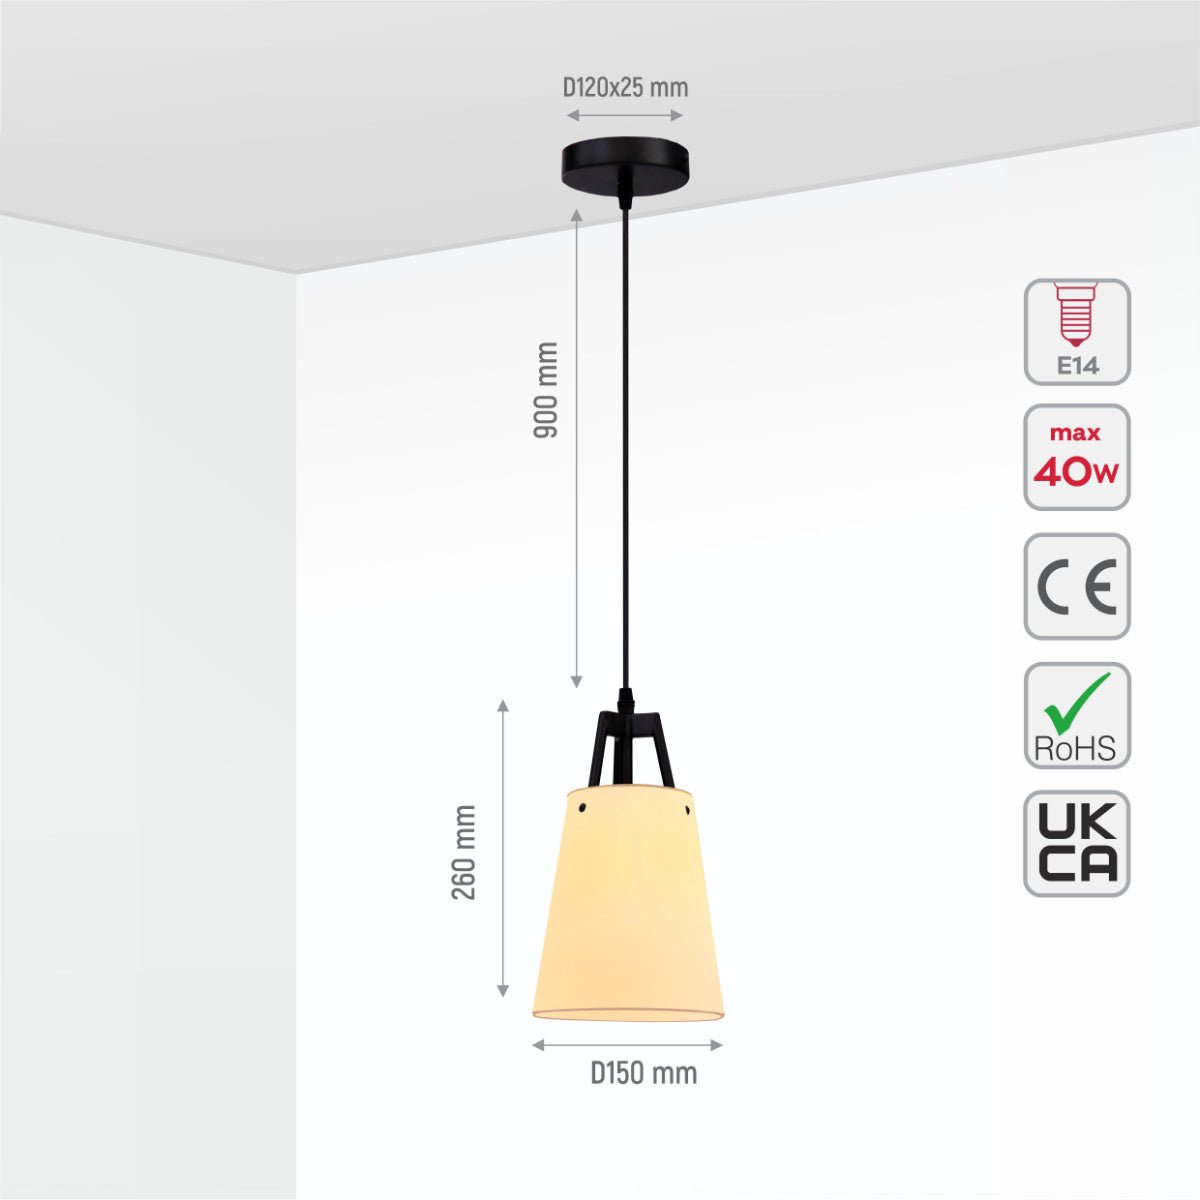 Size and specs of Off White Frustum Fabric Shade Pendant Ceiling Light with E14 Fitting | TEKLED 159-17555